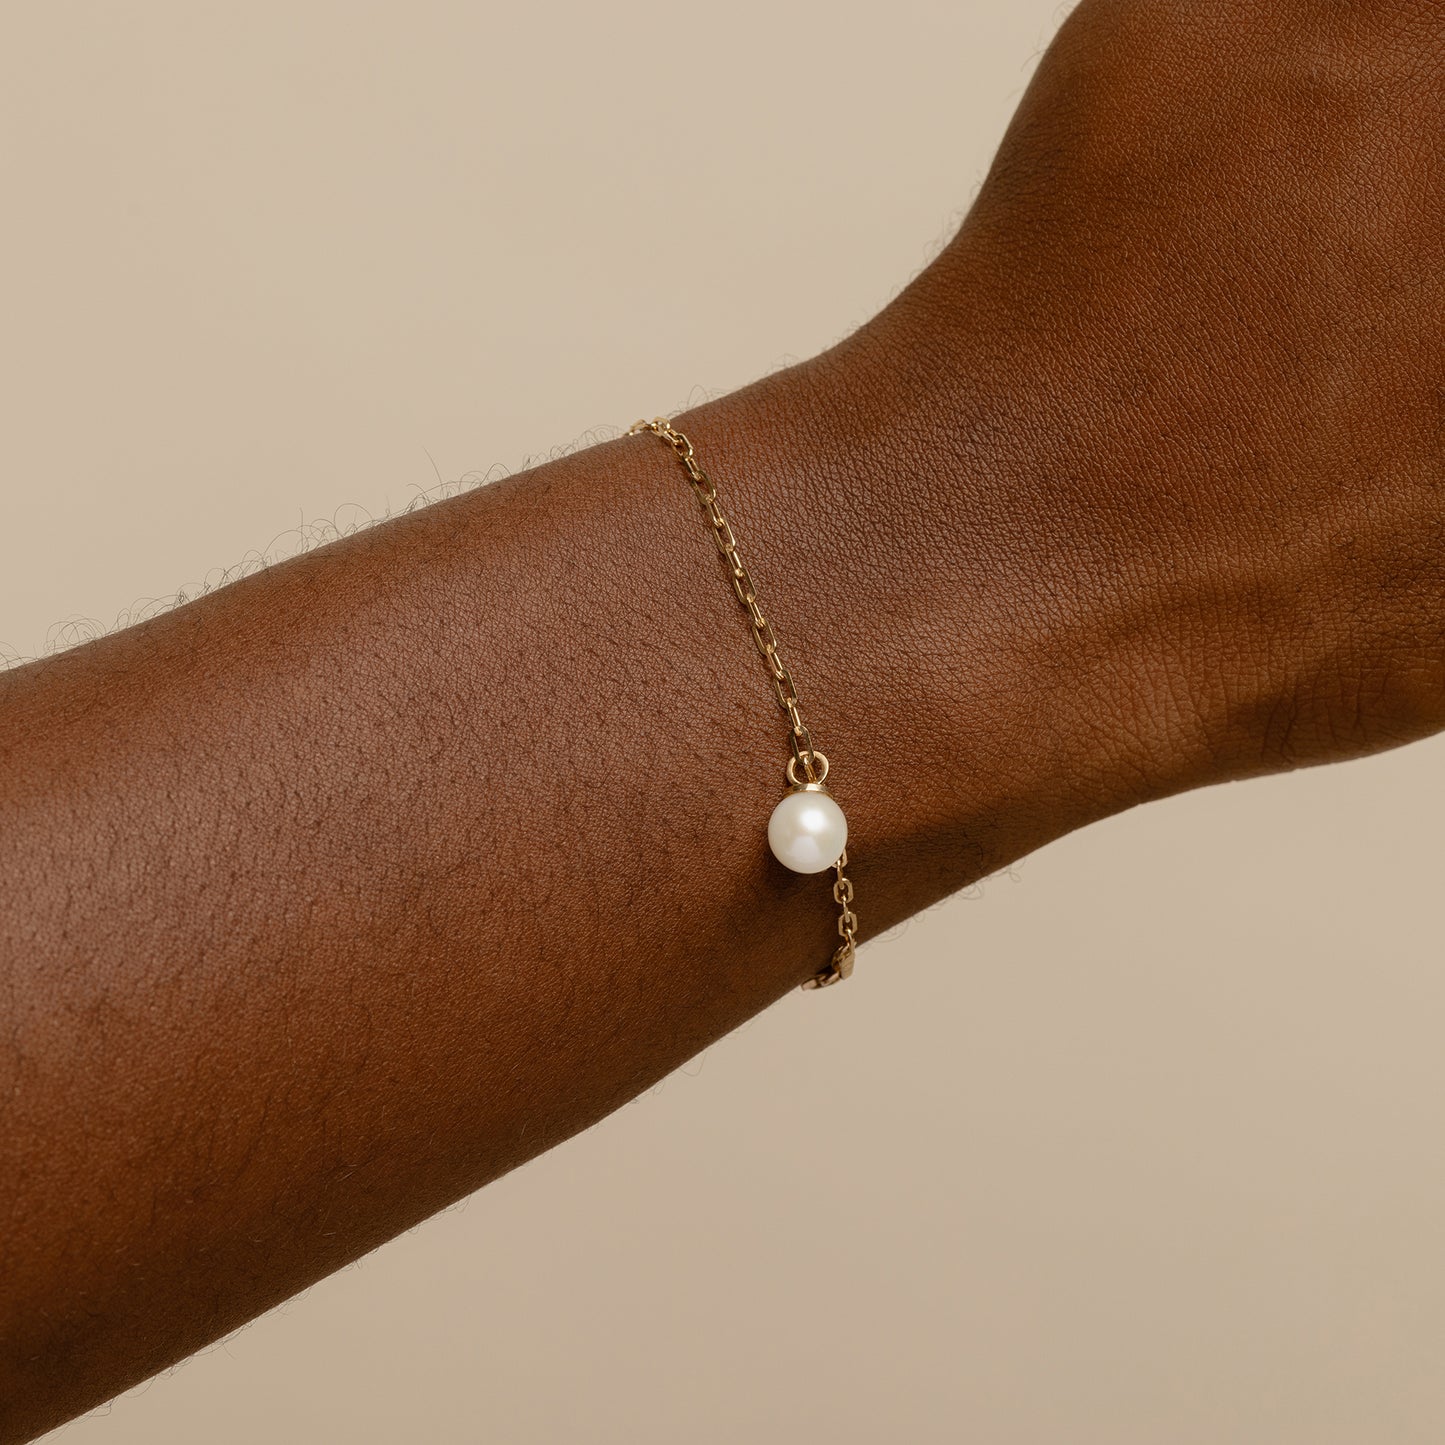 Paperclip Bracelet with Pearl Charm